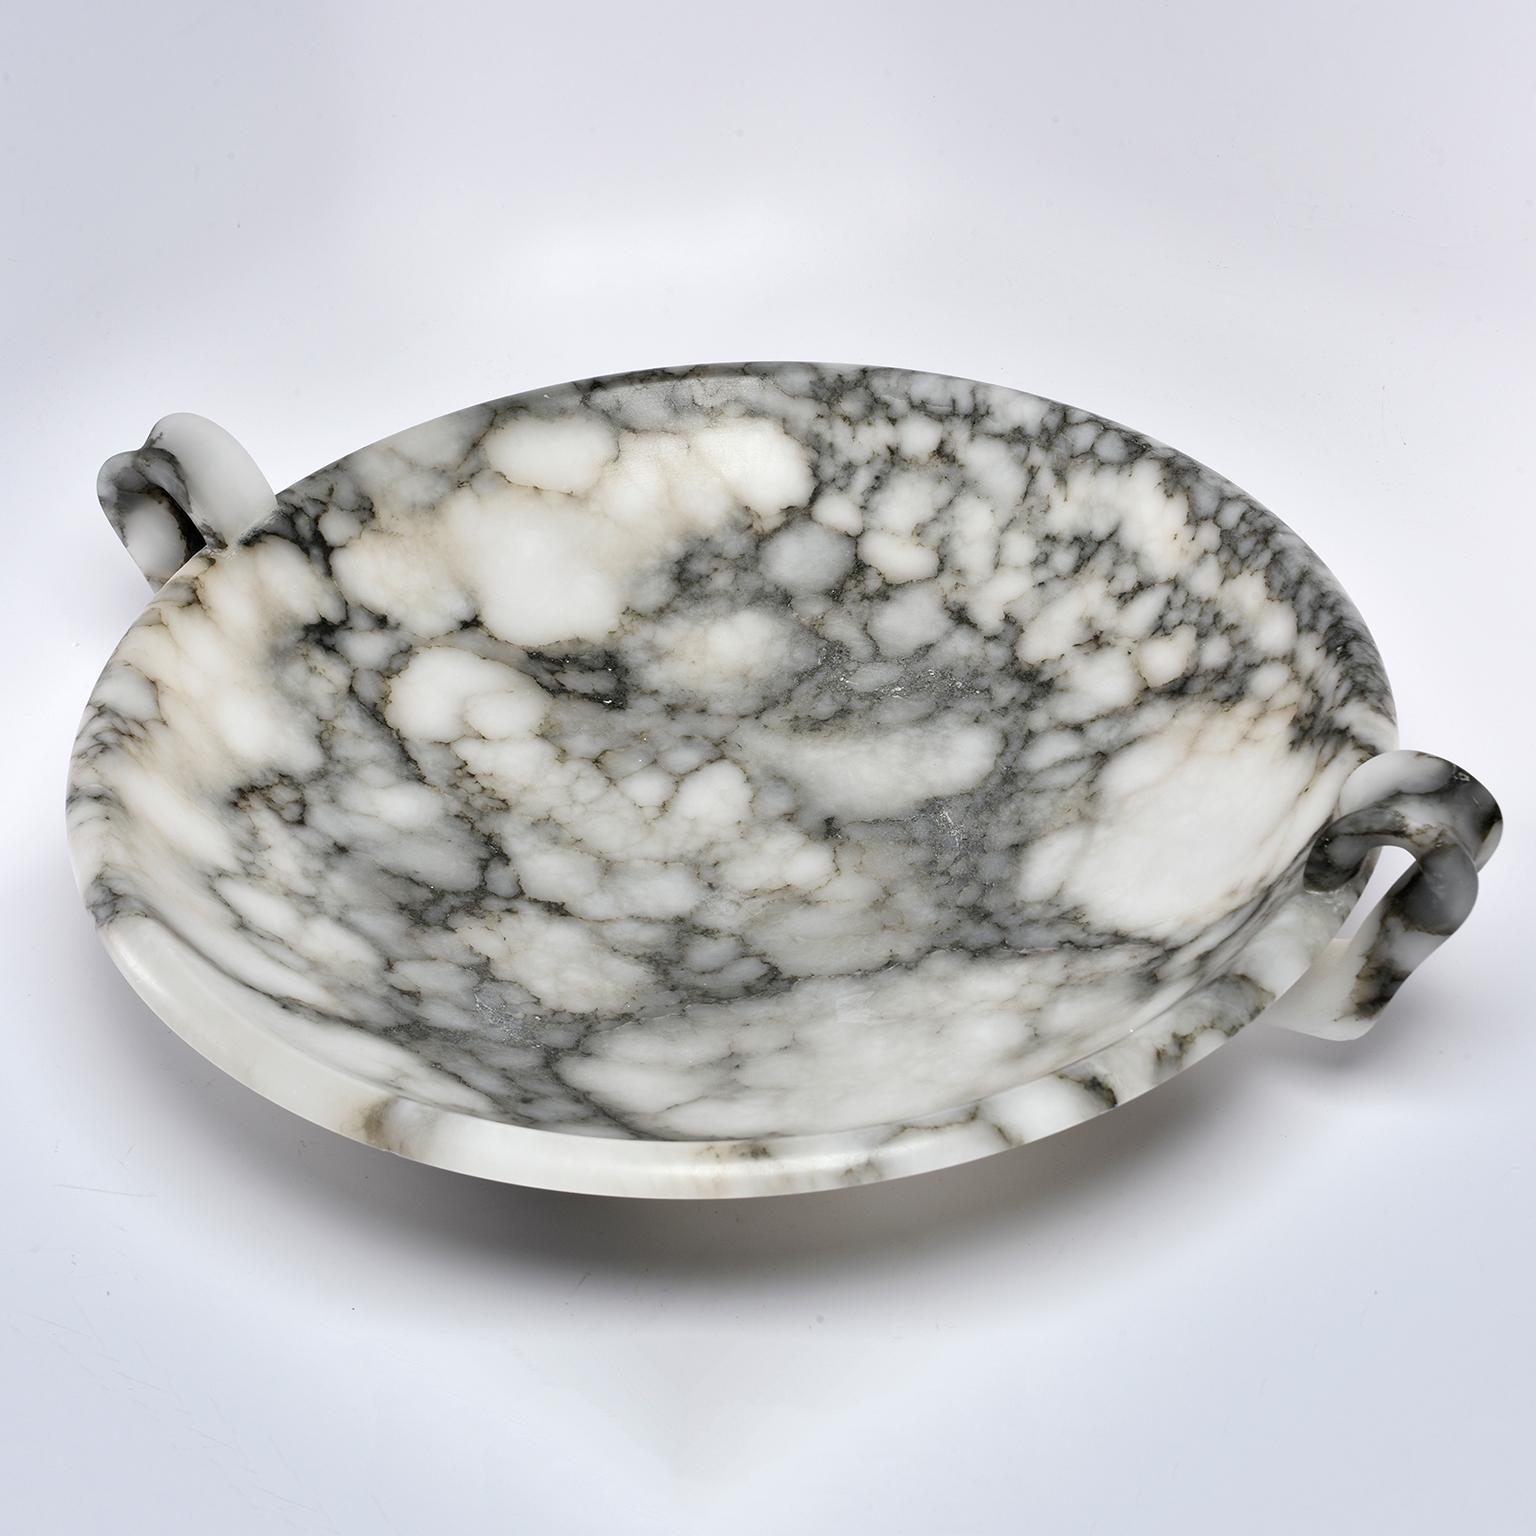 Italian Extra Large White and Gray Alabaster Centerpiece with Handles